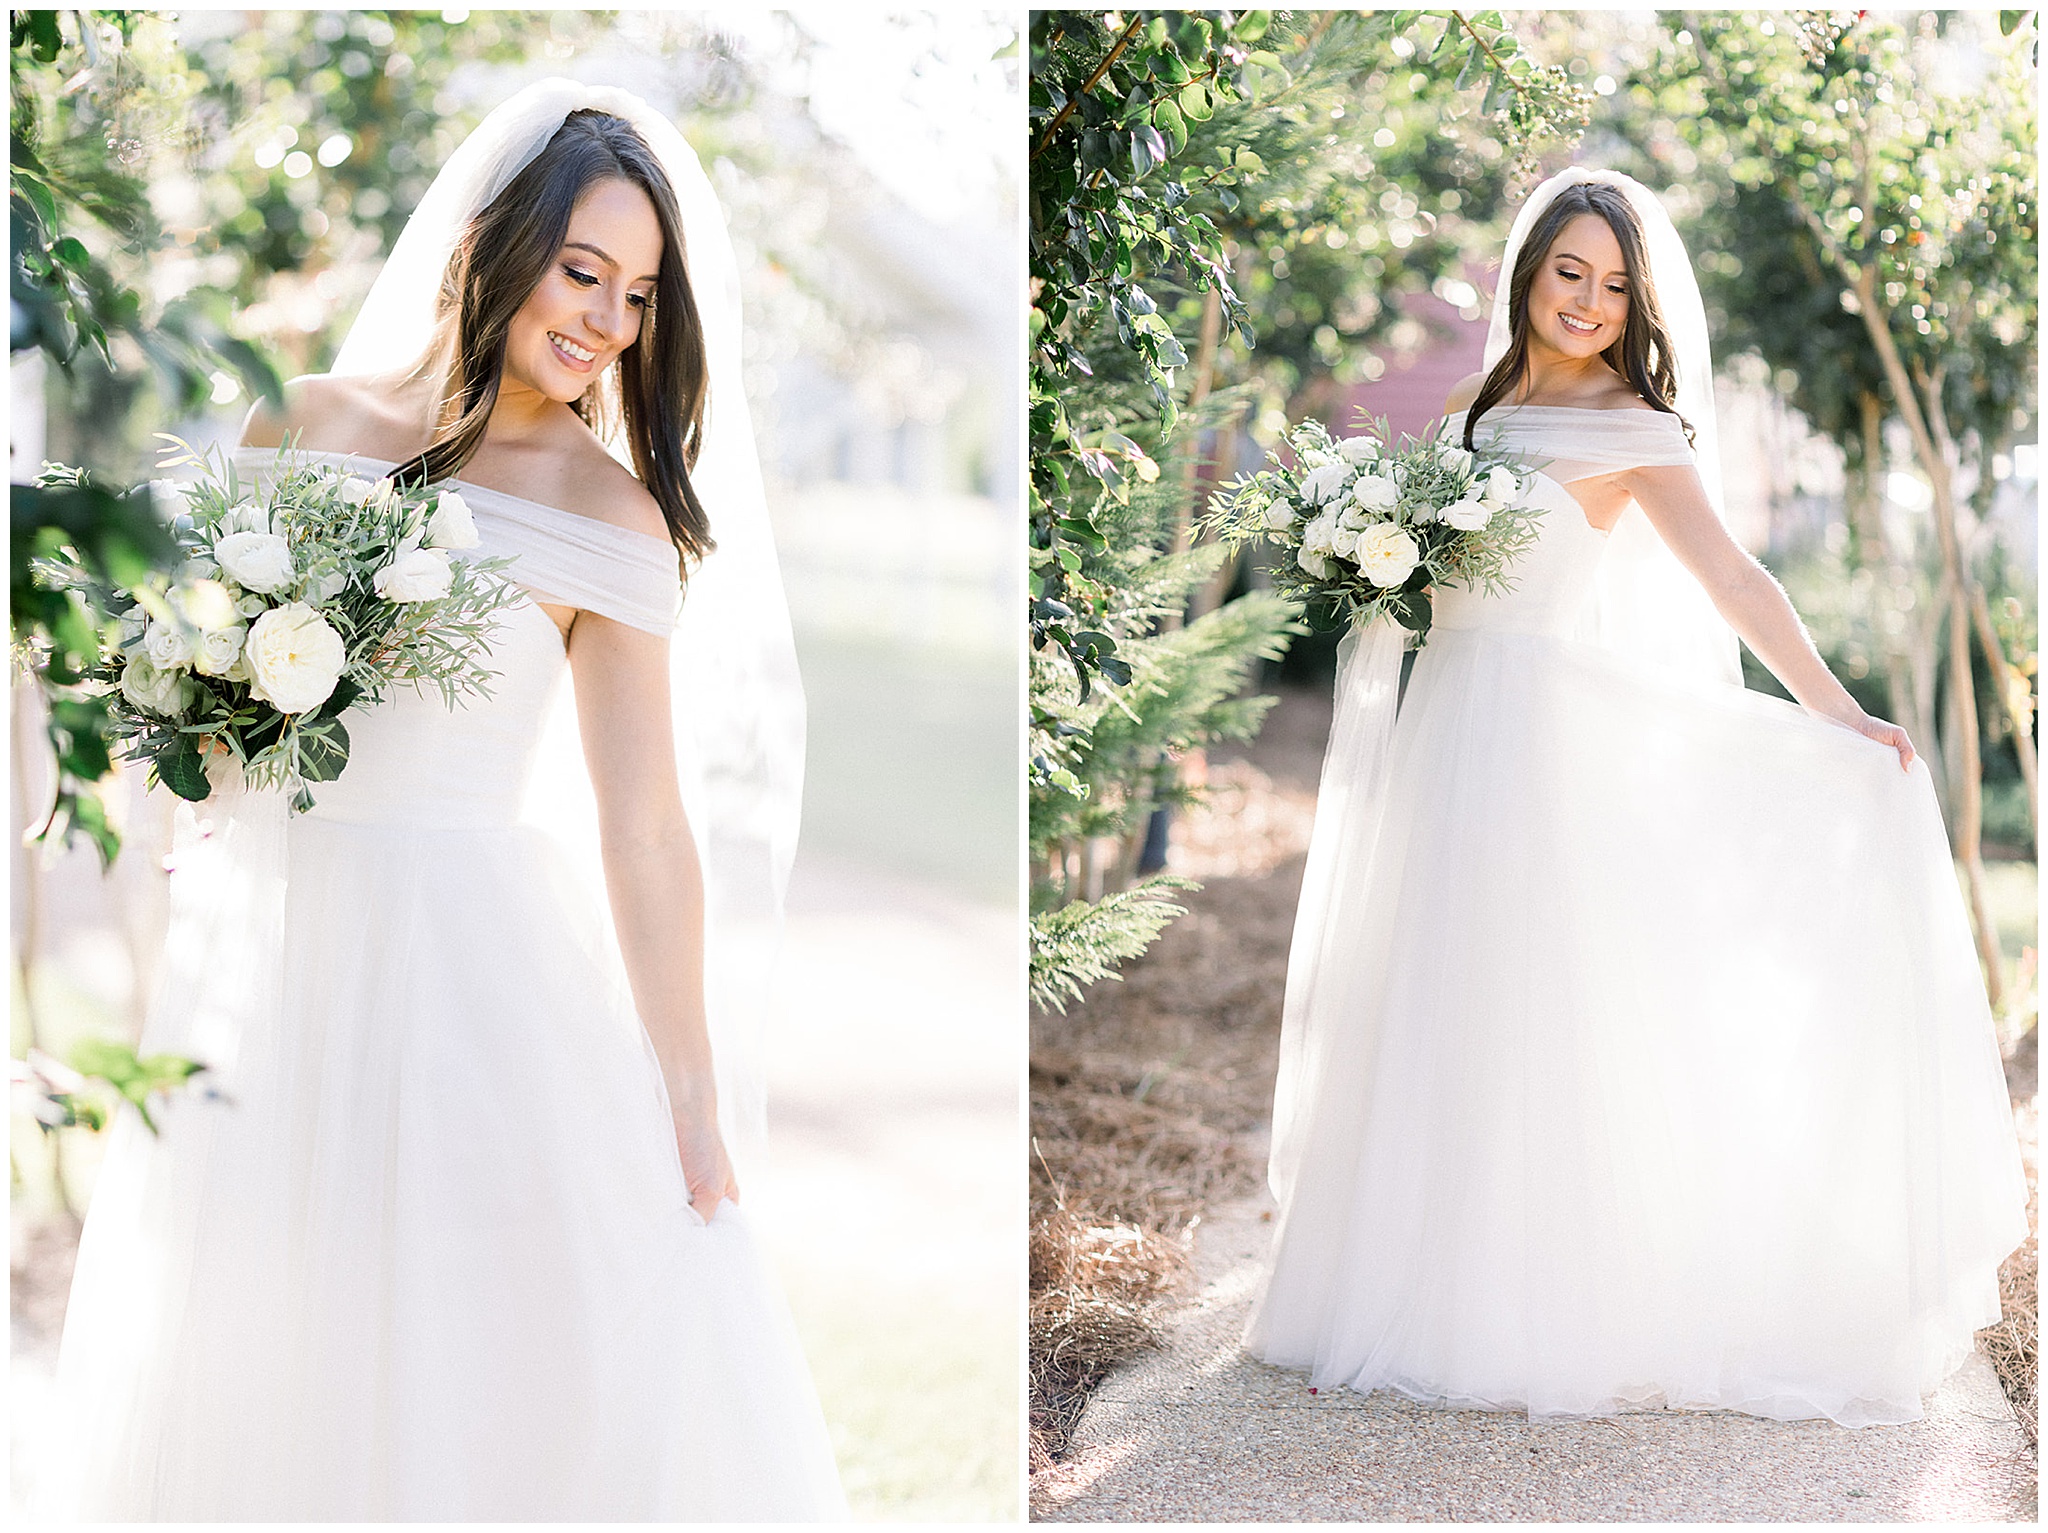 A bride dances by herself while holding her train on a sidewalk surrounded by gardens at south eden plantation